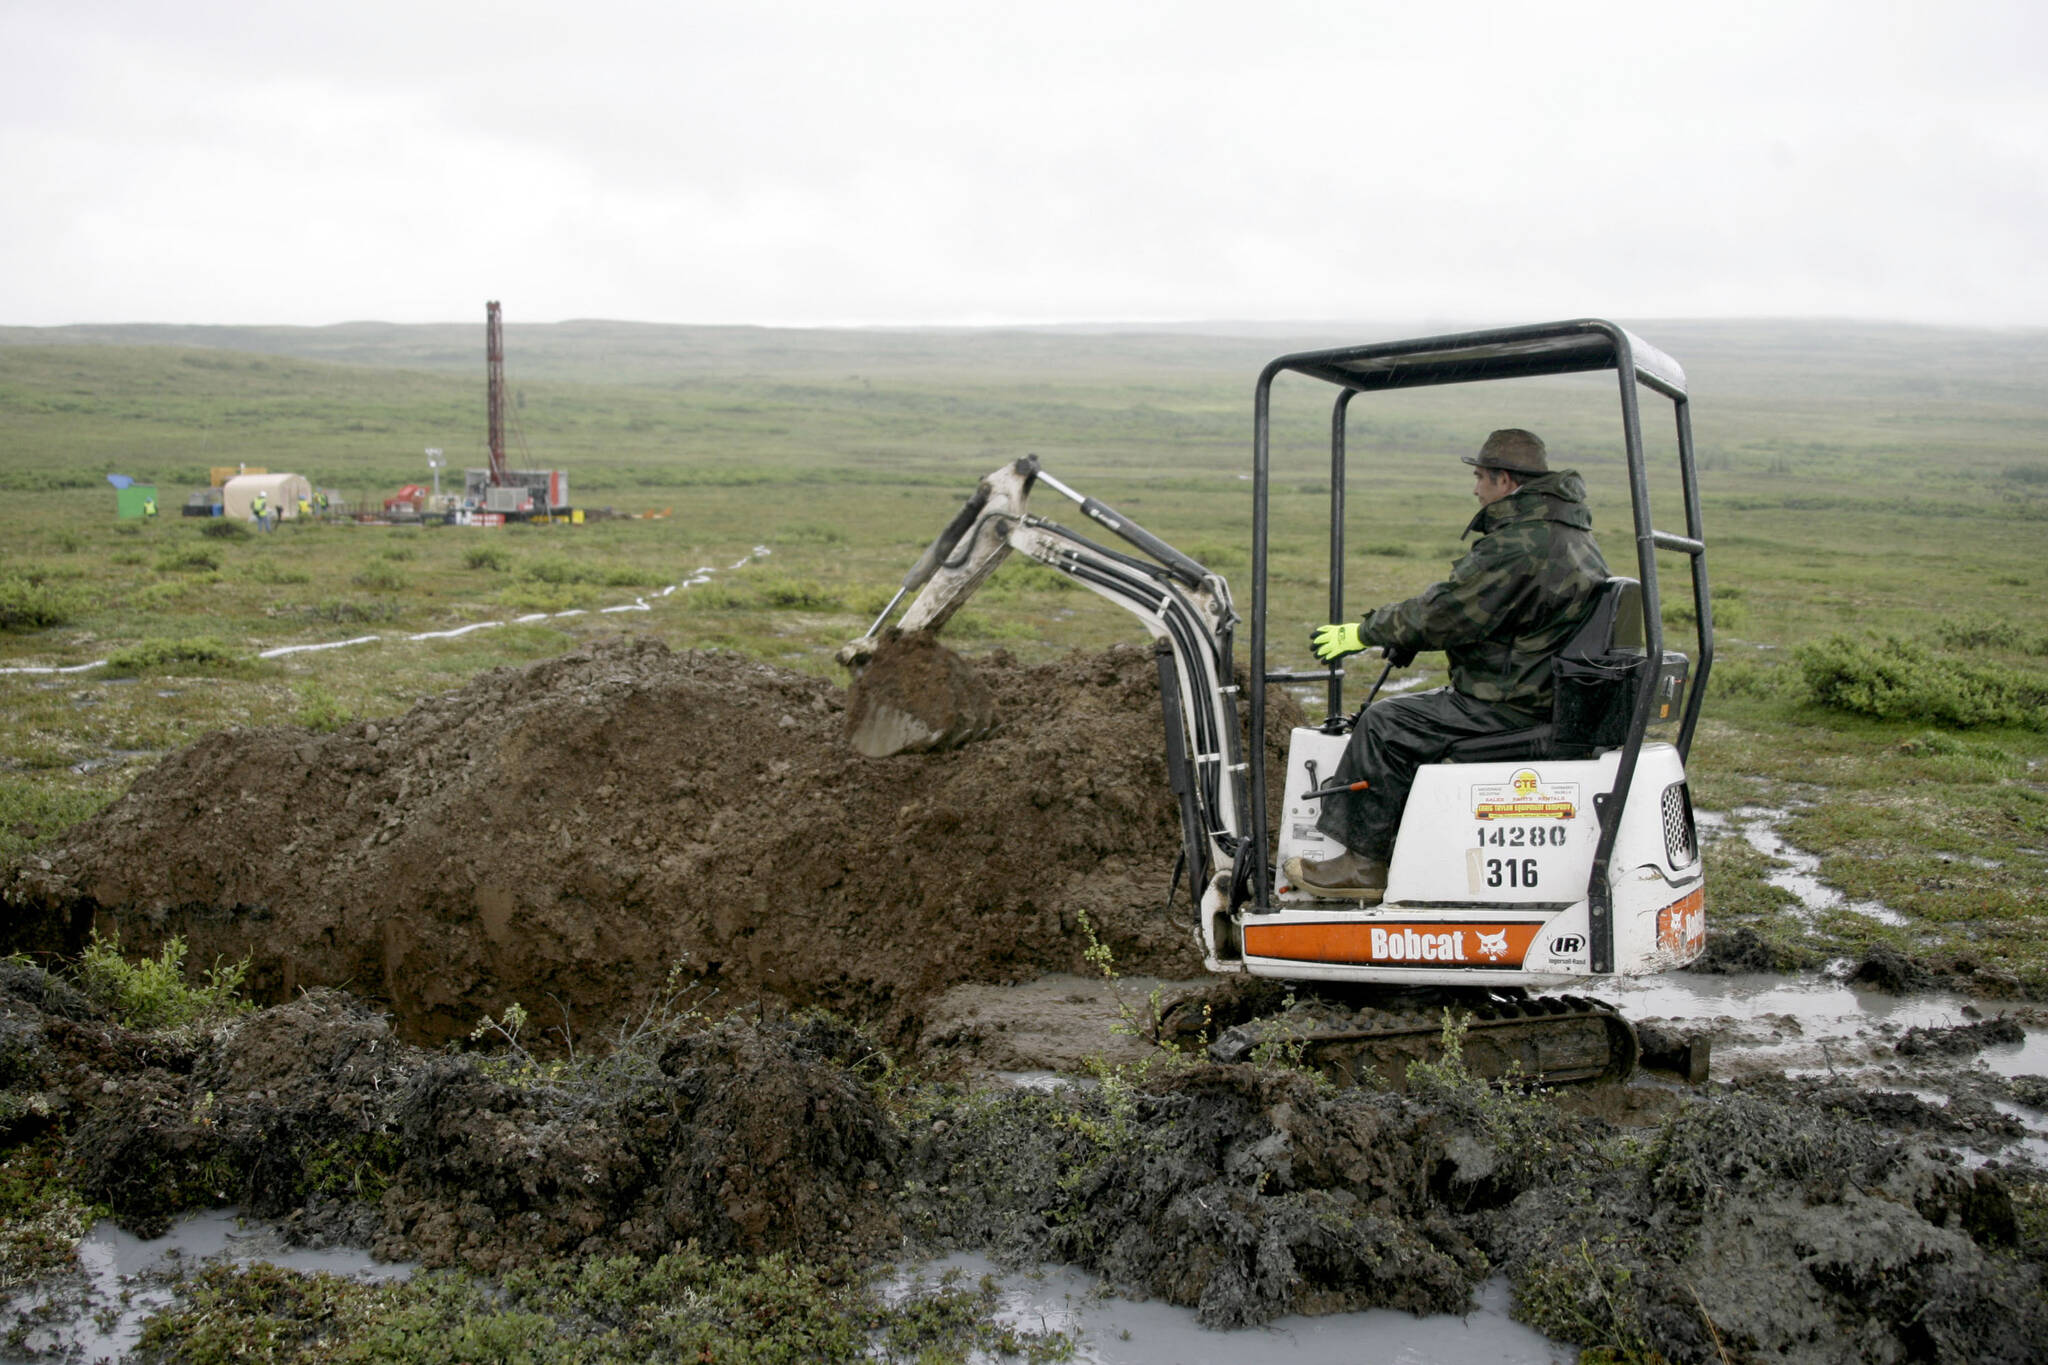 A worker with the Pebble Mine project digs in the Bristol Bay region of Alaska near the village of Iliamma, Alaska. The U.S. Environmental Protection Agency announced Thursday, Sept. 9, 2021, it would seek to restart a process that could restrict mining in Alaska’s Bristol Bay region, which is renowned for its salmon runs. The announcement is the latest in a long-running dispute over a proposed copper-and-gold mine in the southwest Alaska region. (AP Photo / Al Grillo)